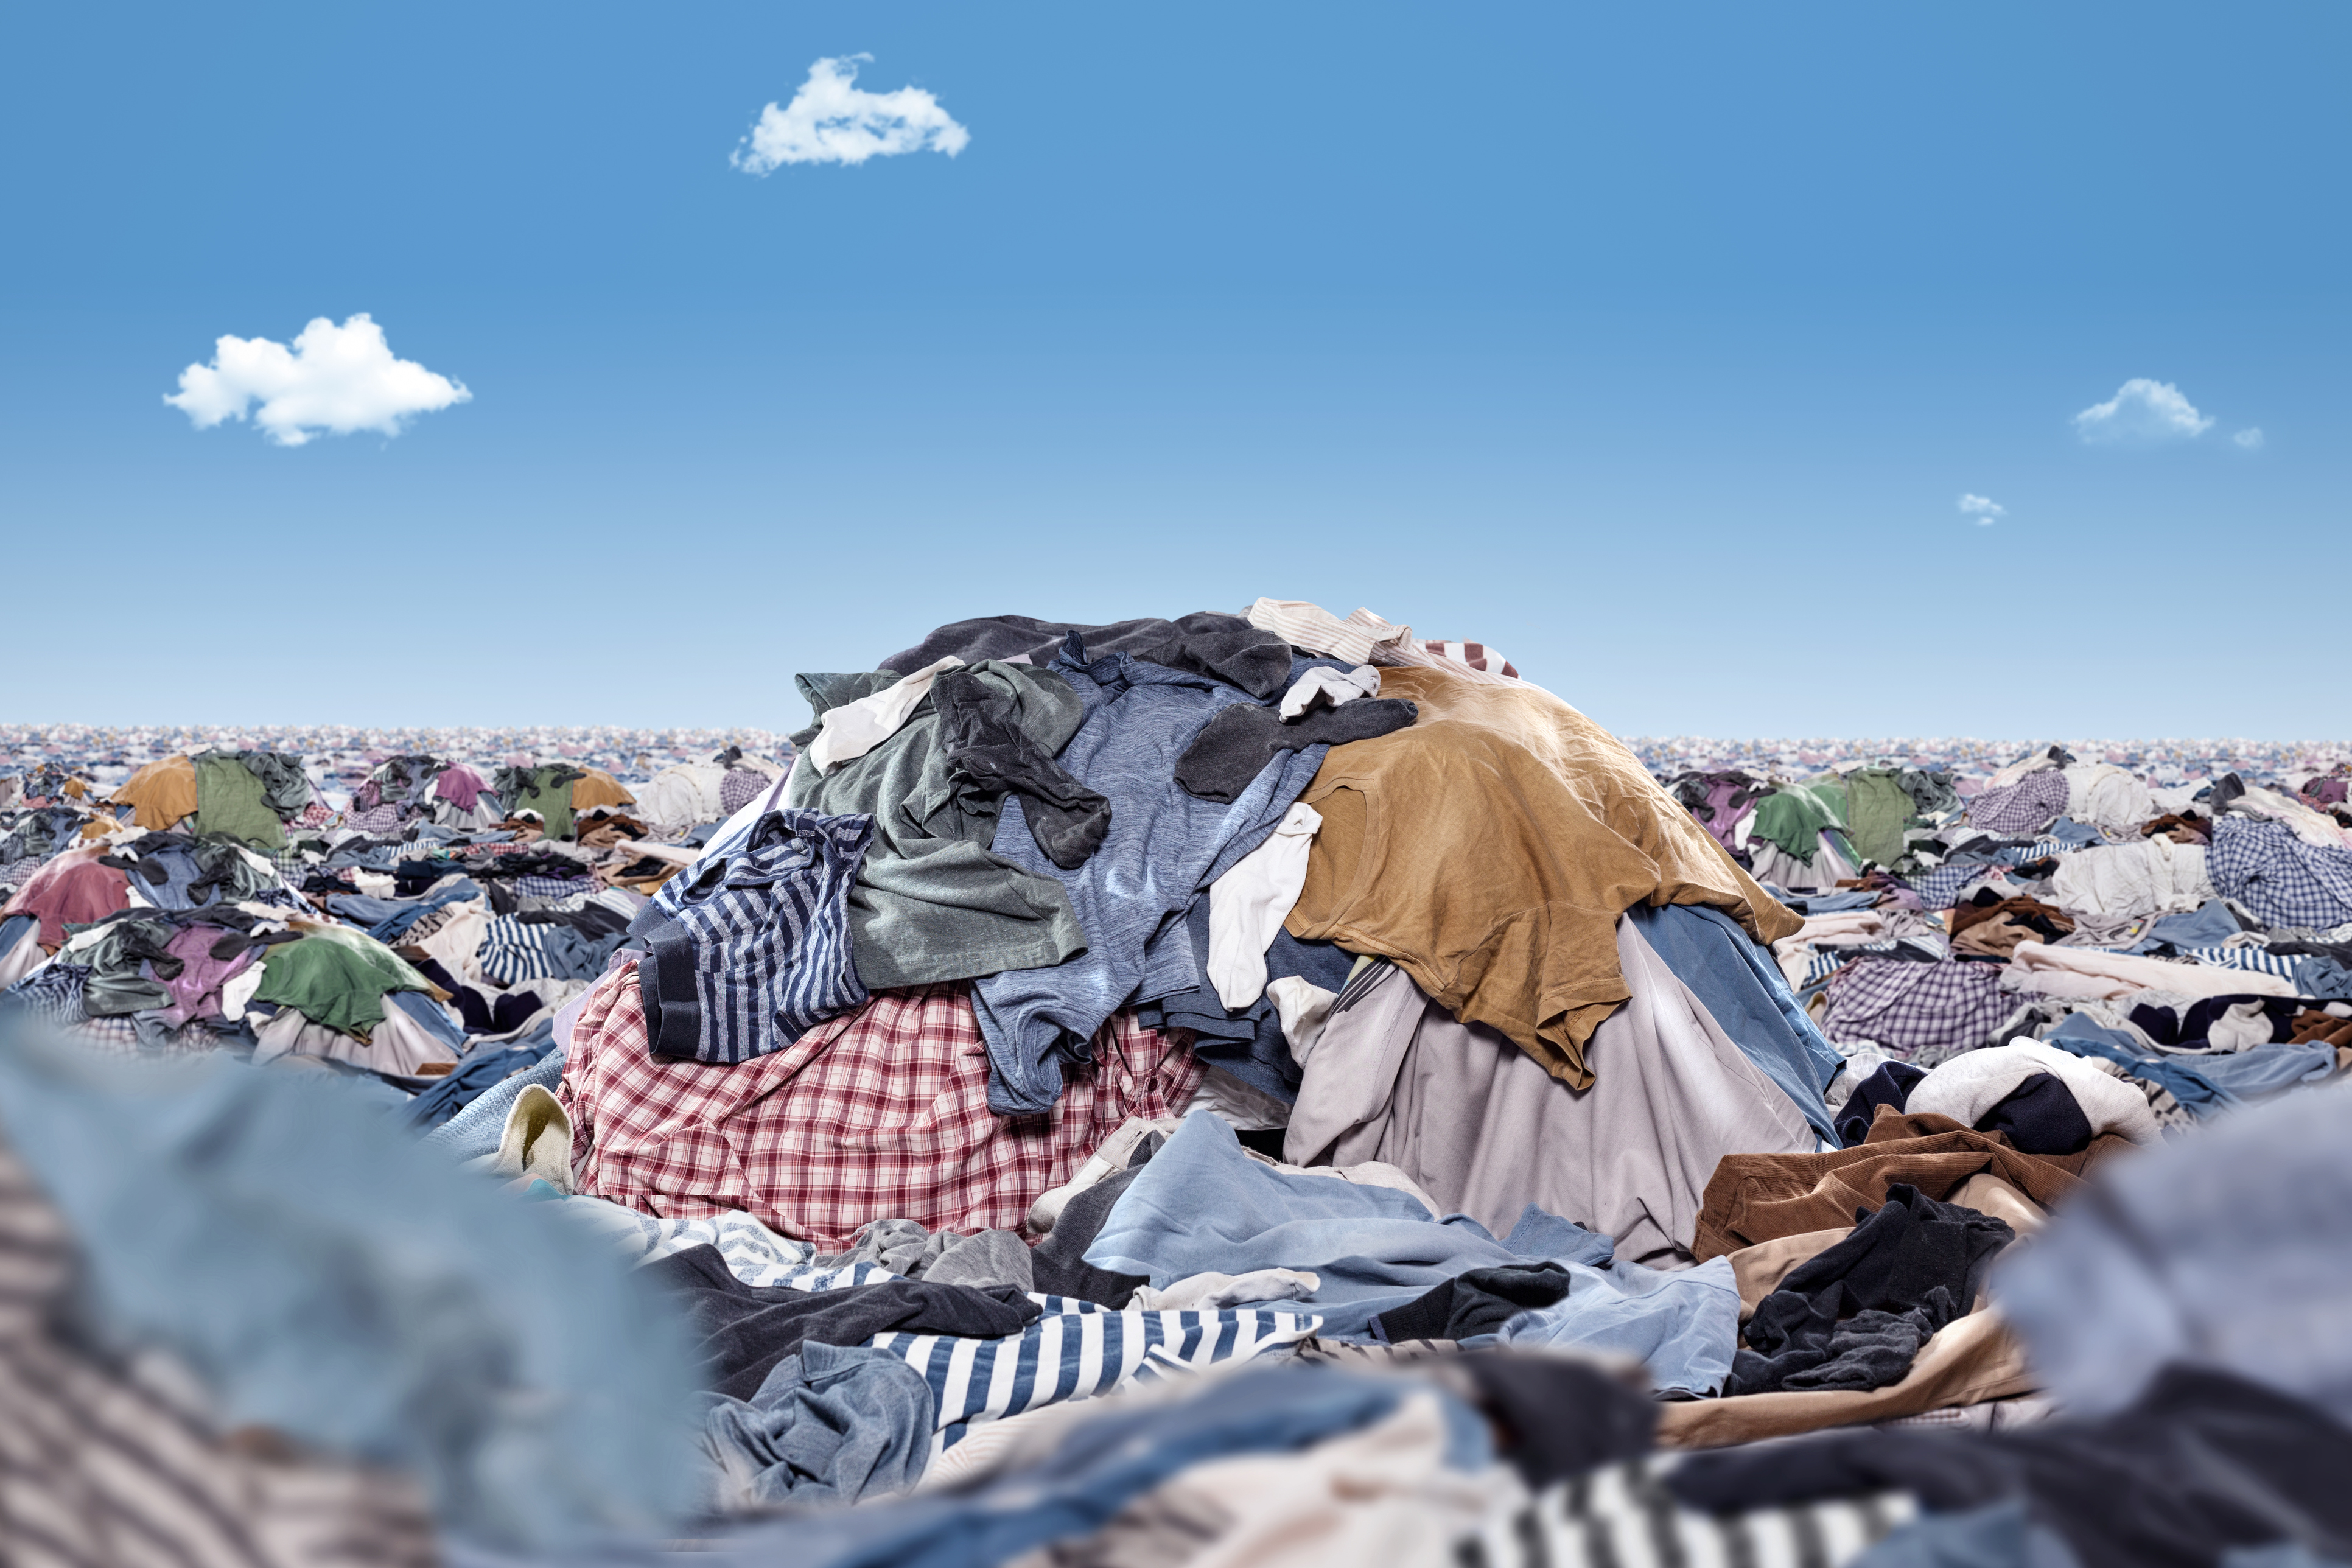 Following a t-shirt from cotton field to landfill shows the true